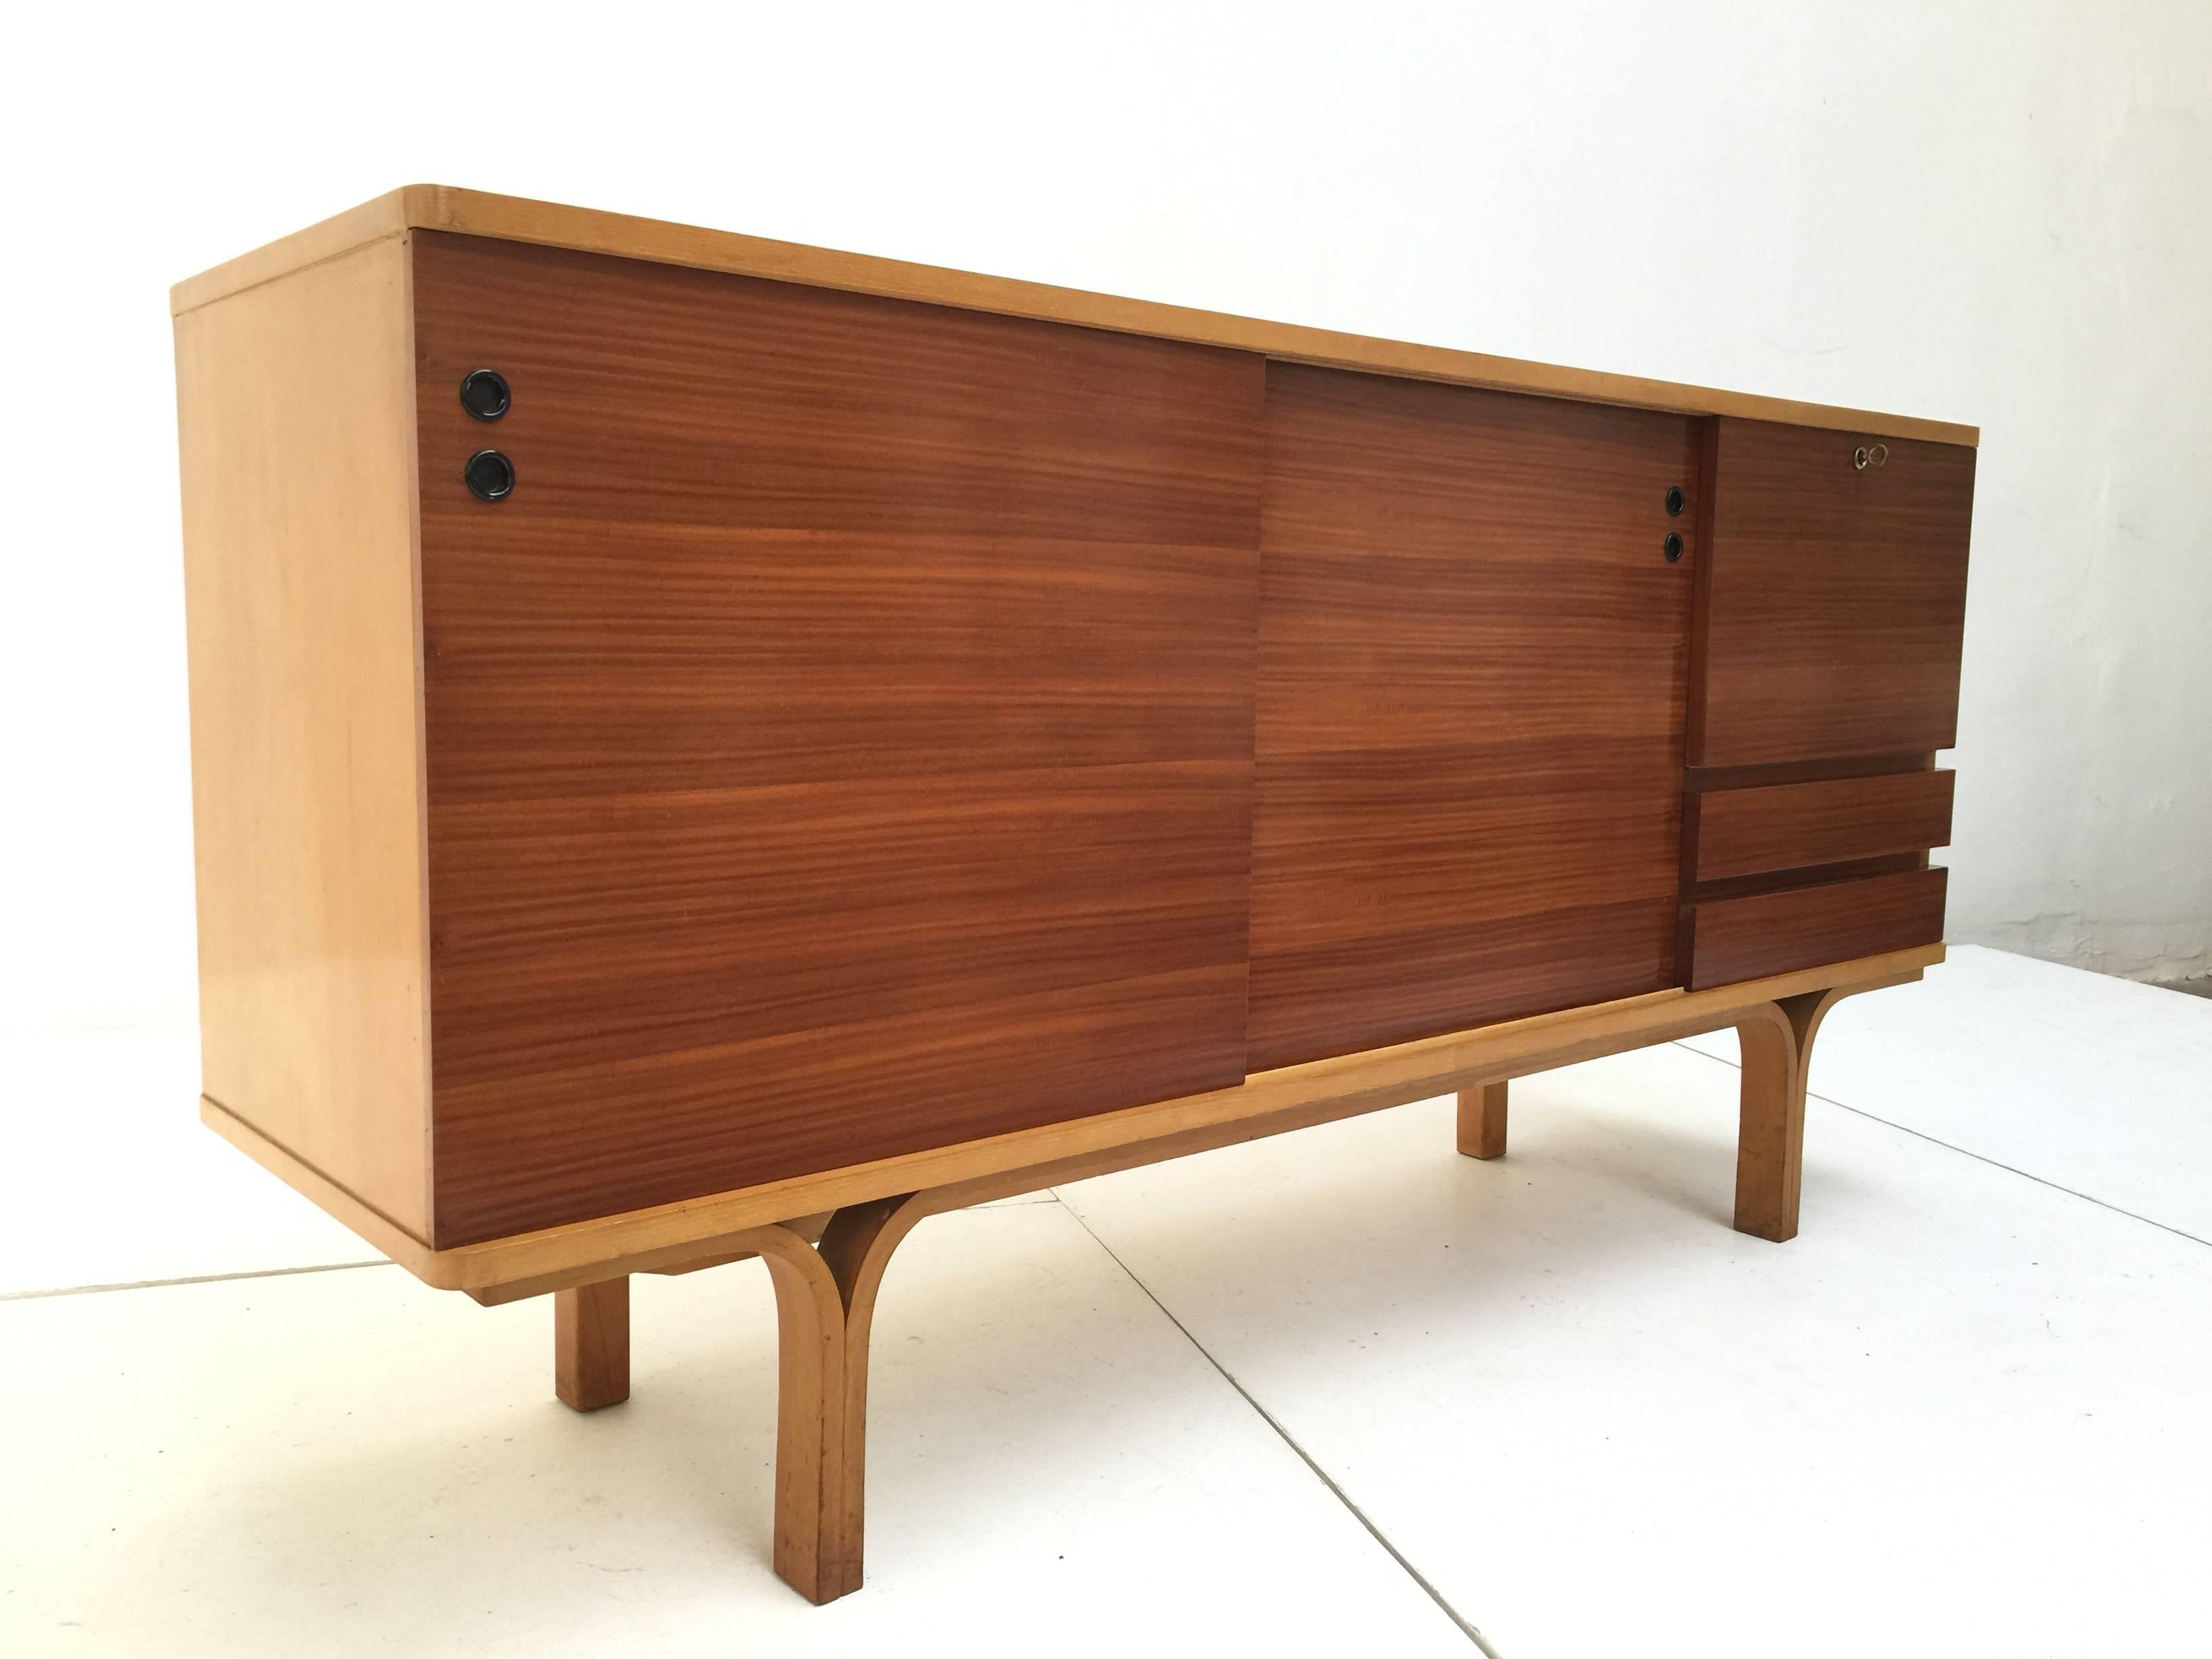 Brass Stunning Ash and Mahogany Credenza Bar by J.A Motte, 1954 for Group 4 Charron